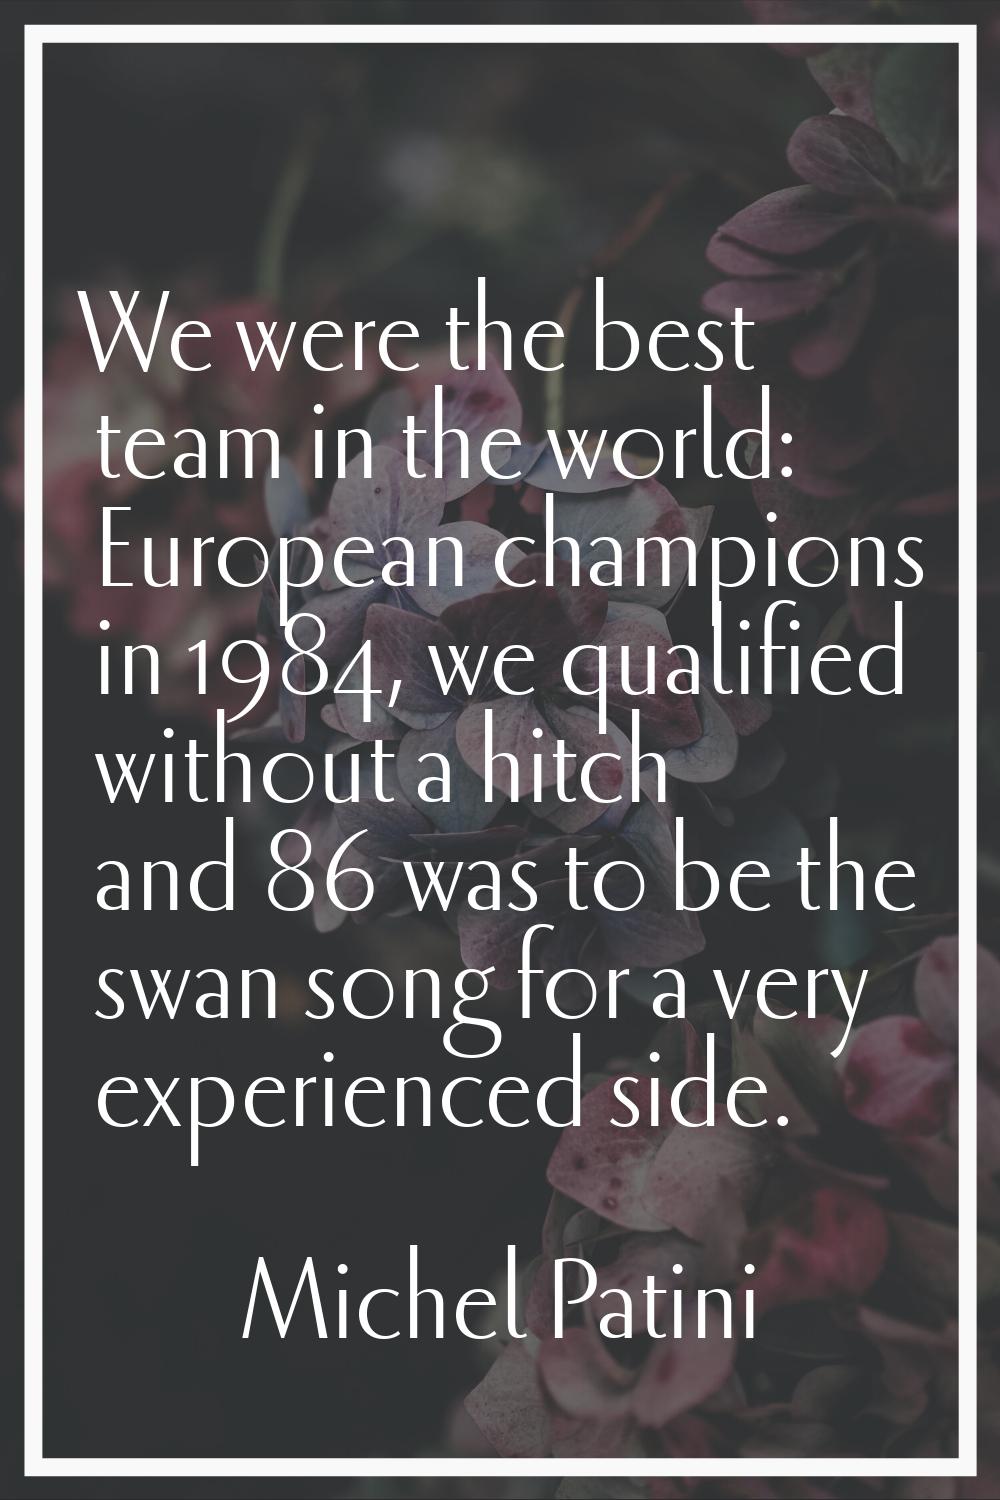 We were the best team in the world: European champions in 1984, we qualified without a hitch and 86